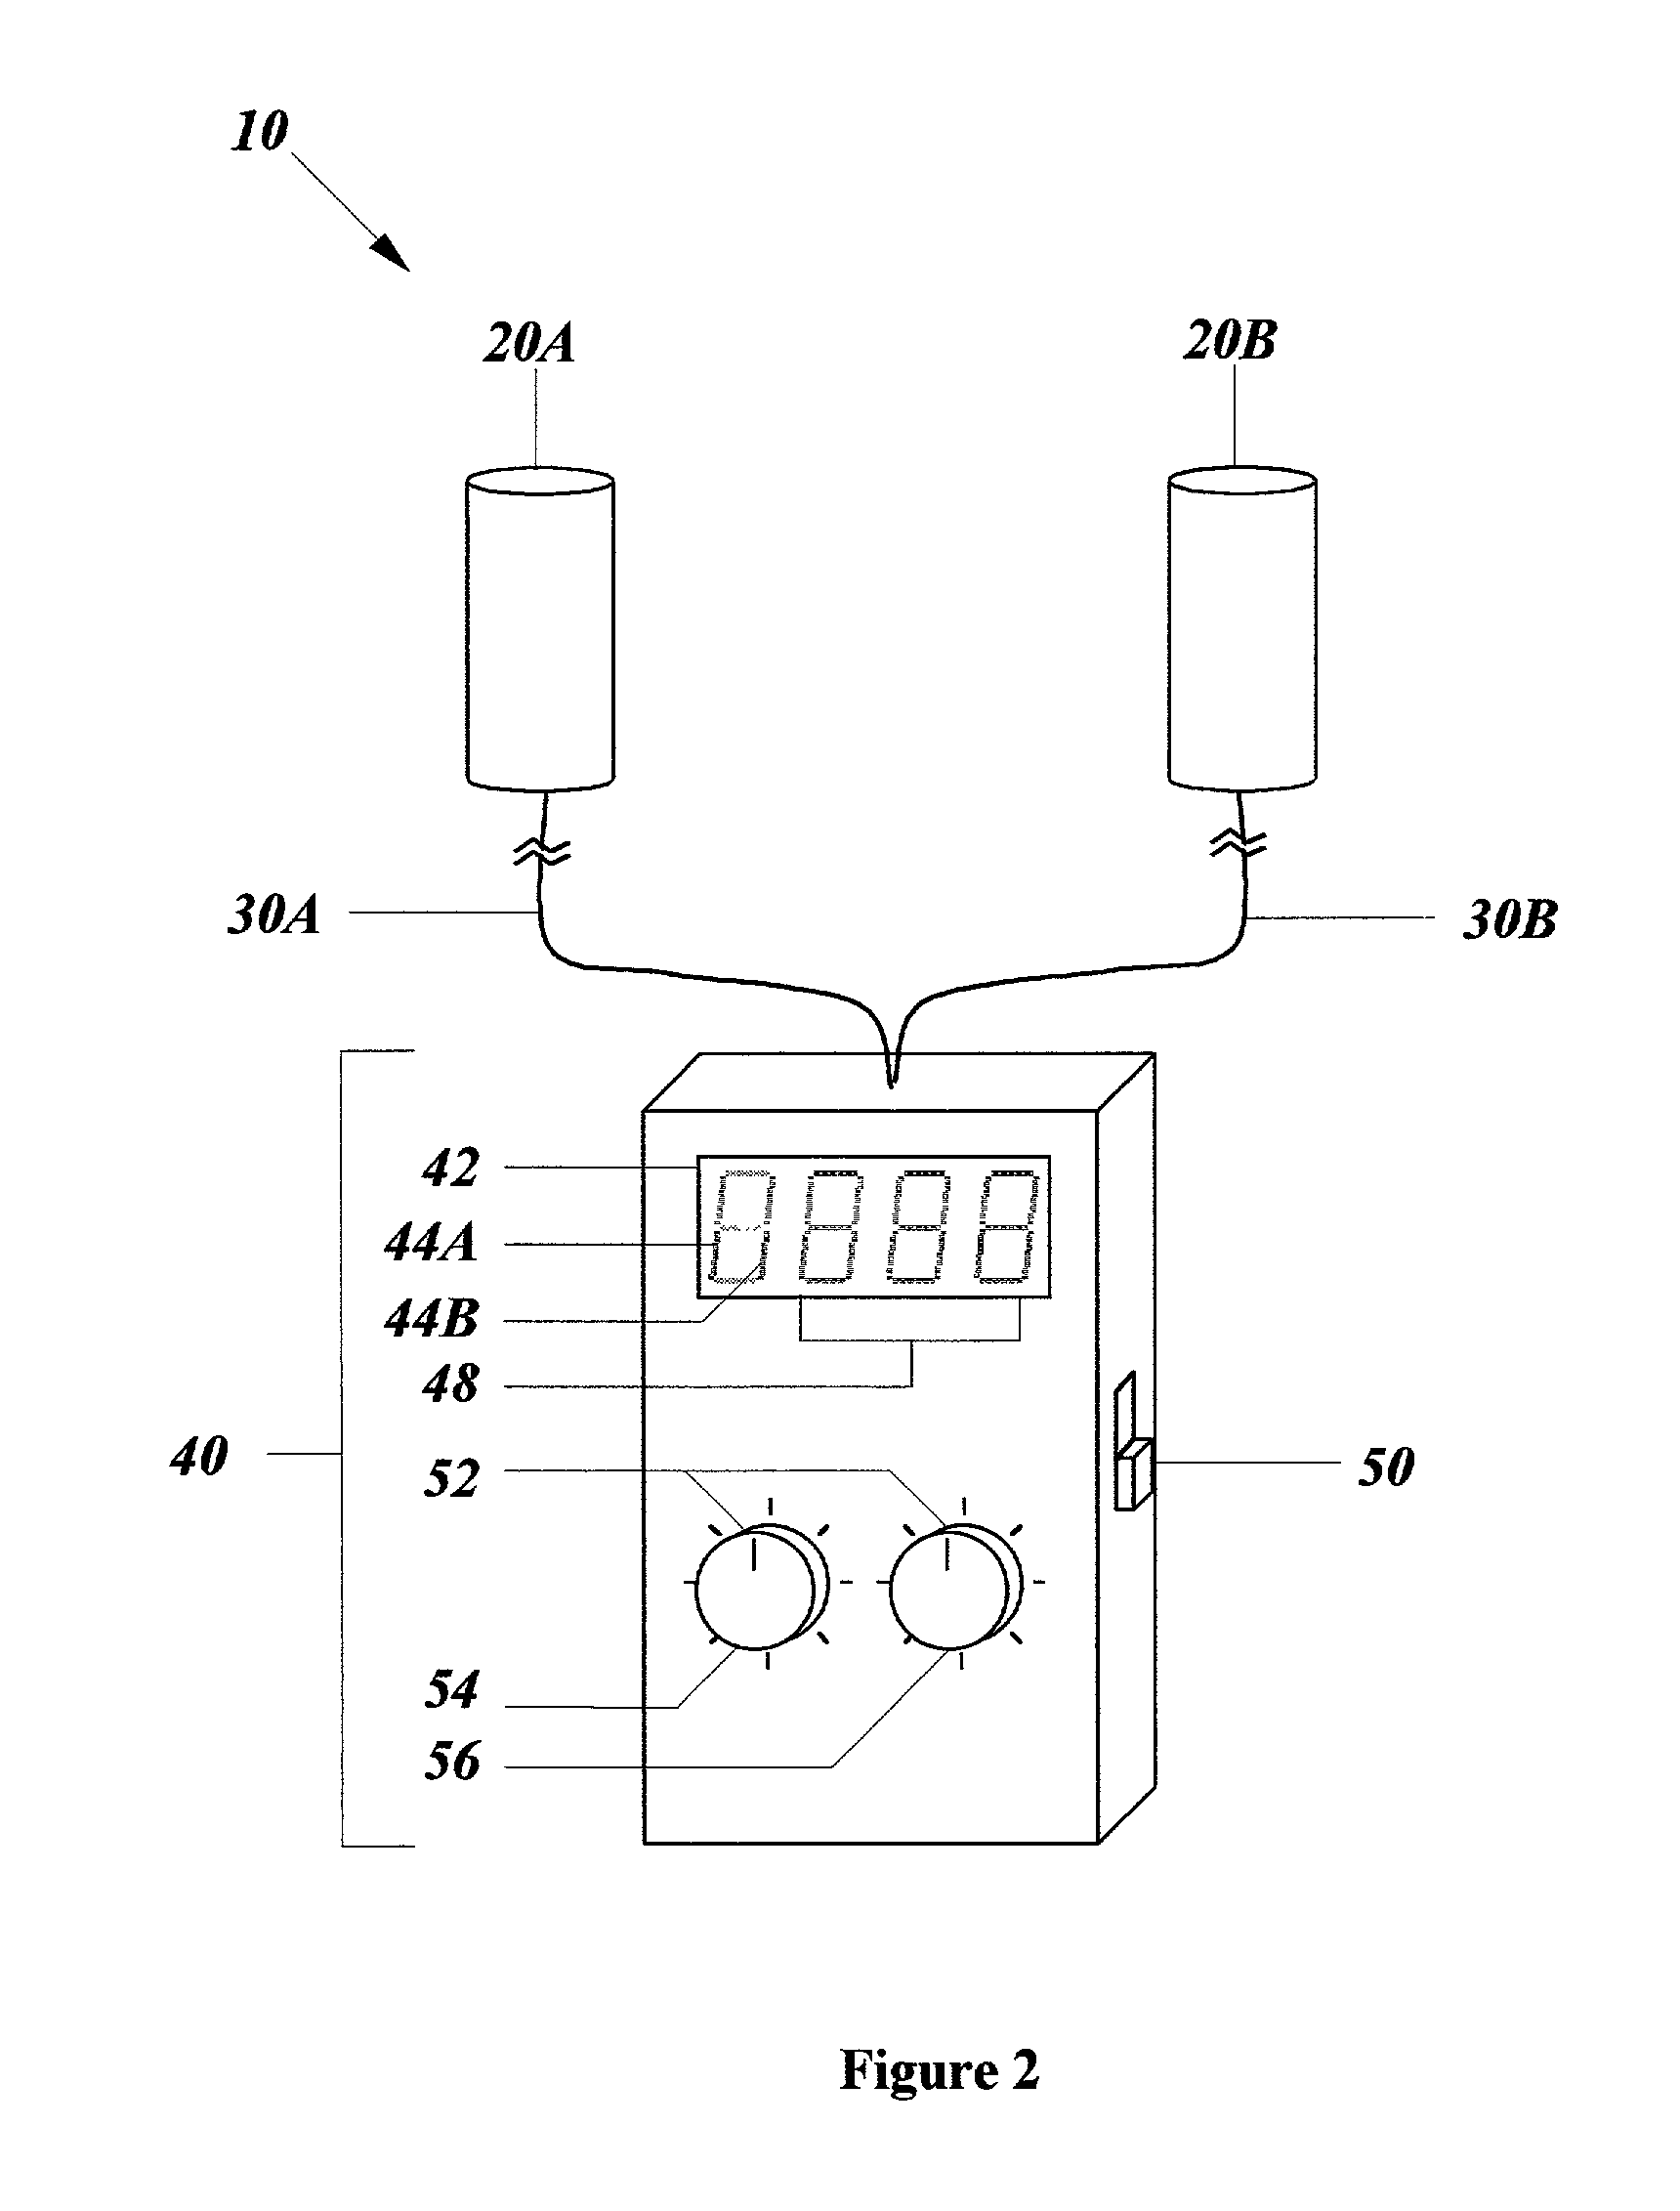 Method and apparatus for inducing alternating tactile stimulations